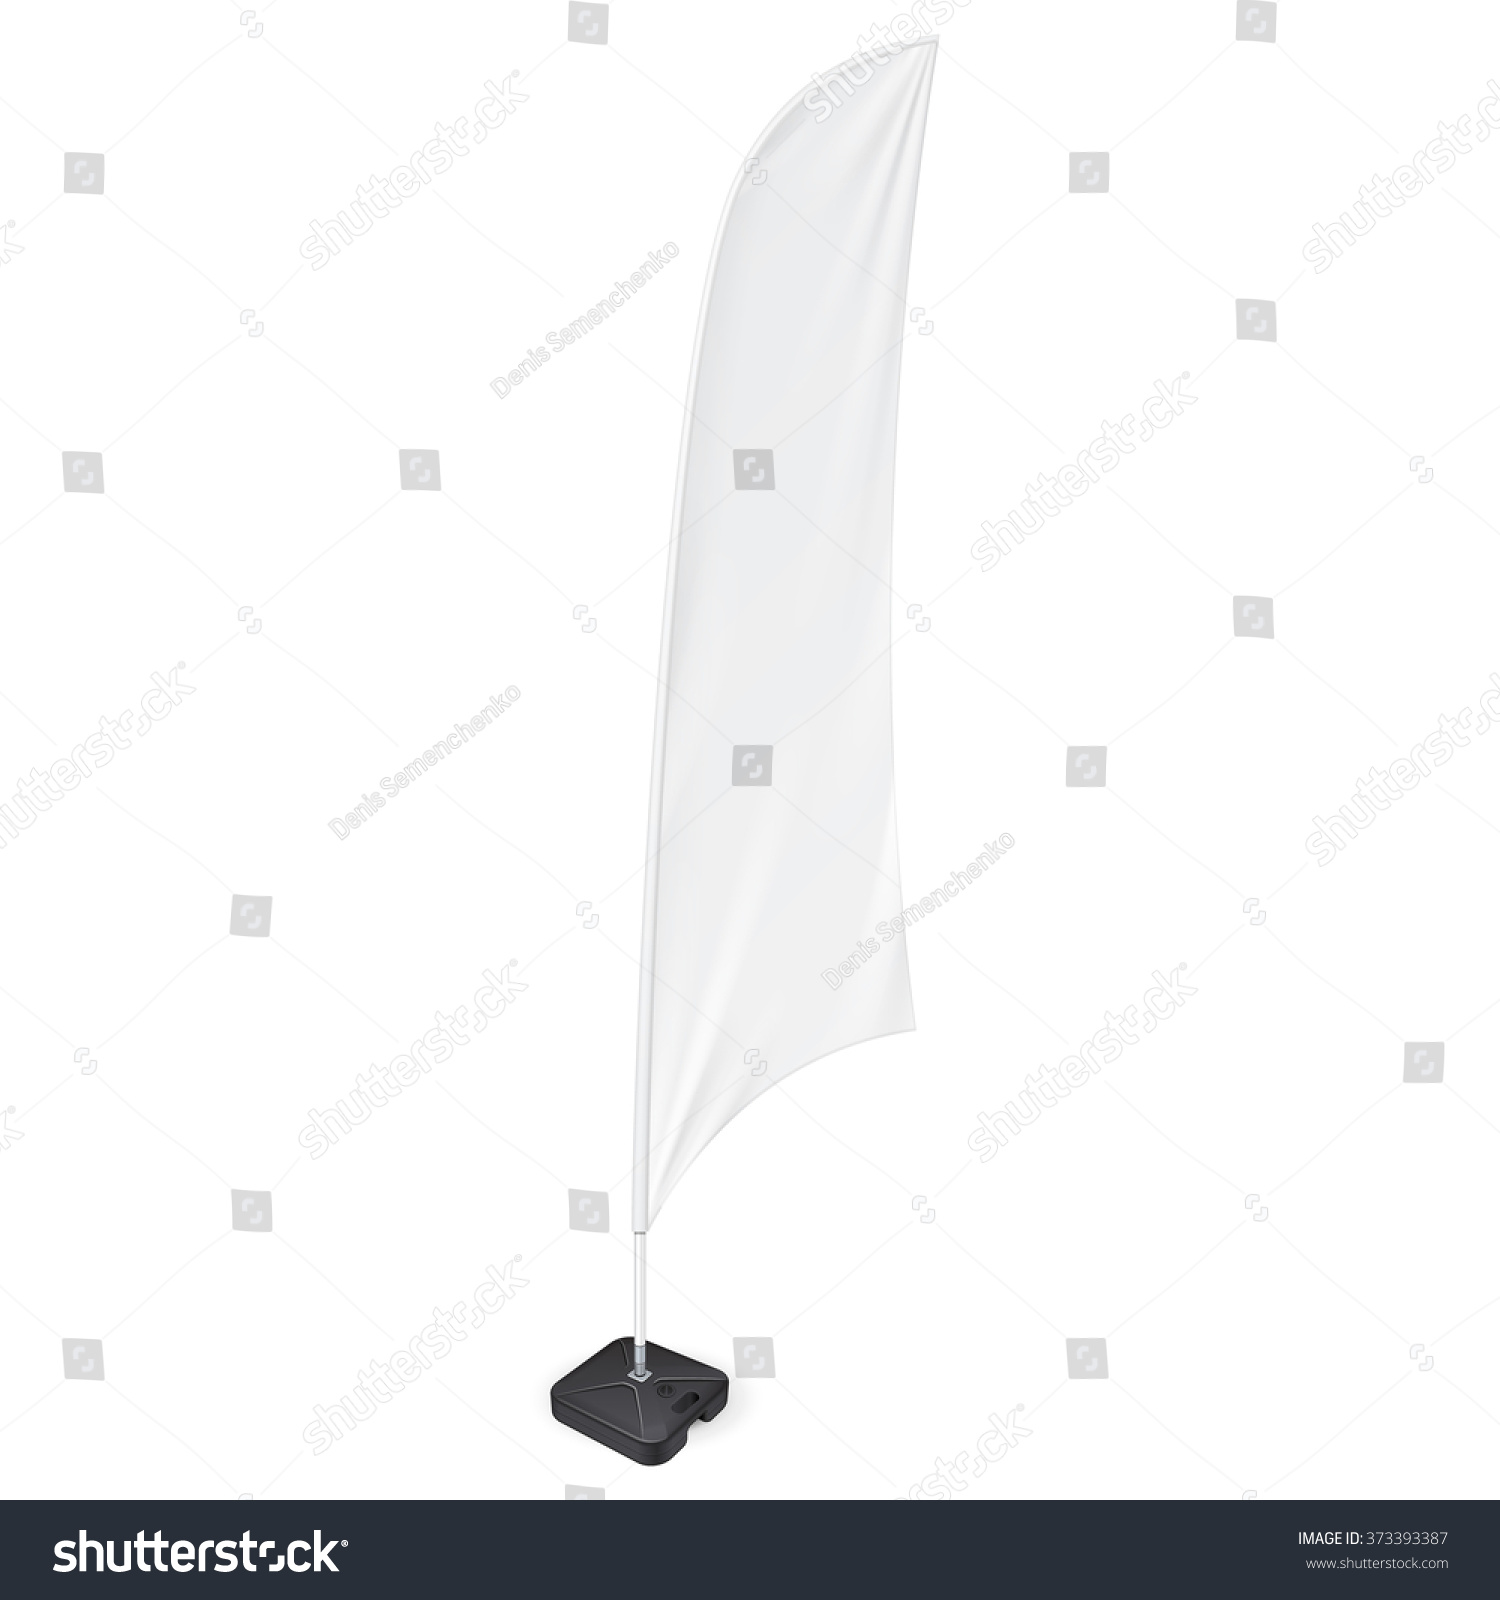 White Outdoor Feather Flag With Ground Fillable Water Base, Stander Advertising Banner Shield. Mock Up Products On White Background Isolated. Ready For Your Design. Product Packing. Vector EPS10 #373393387